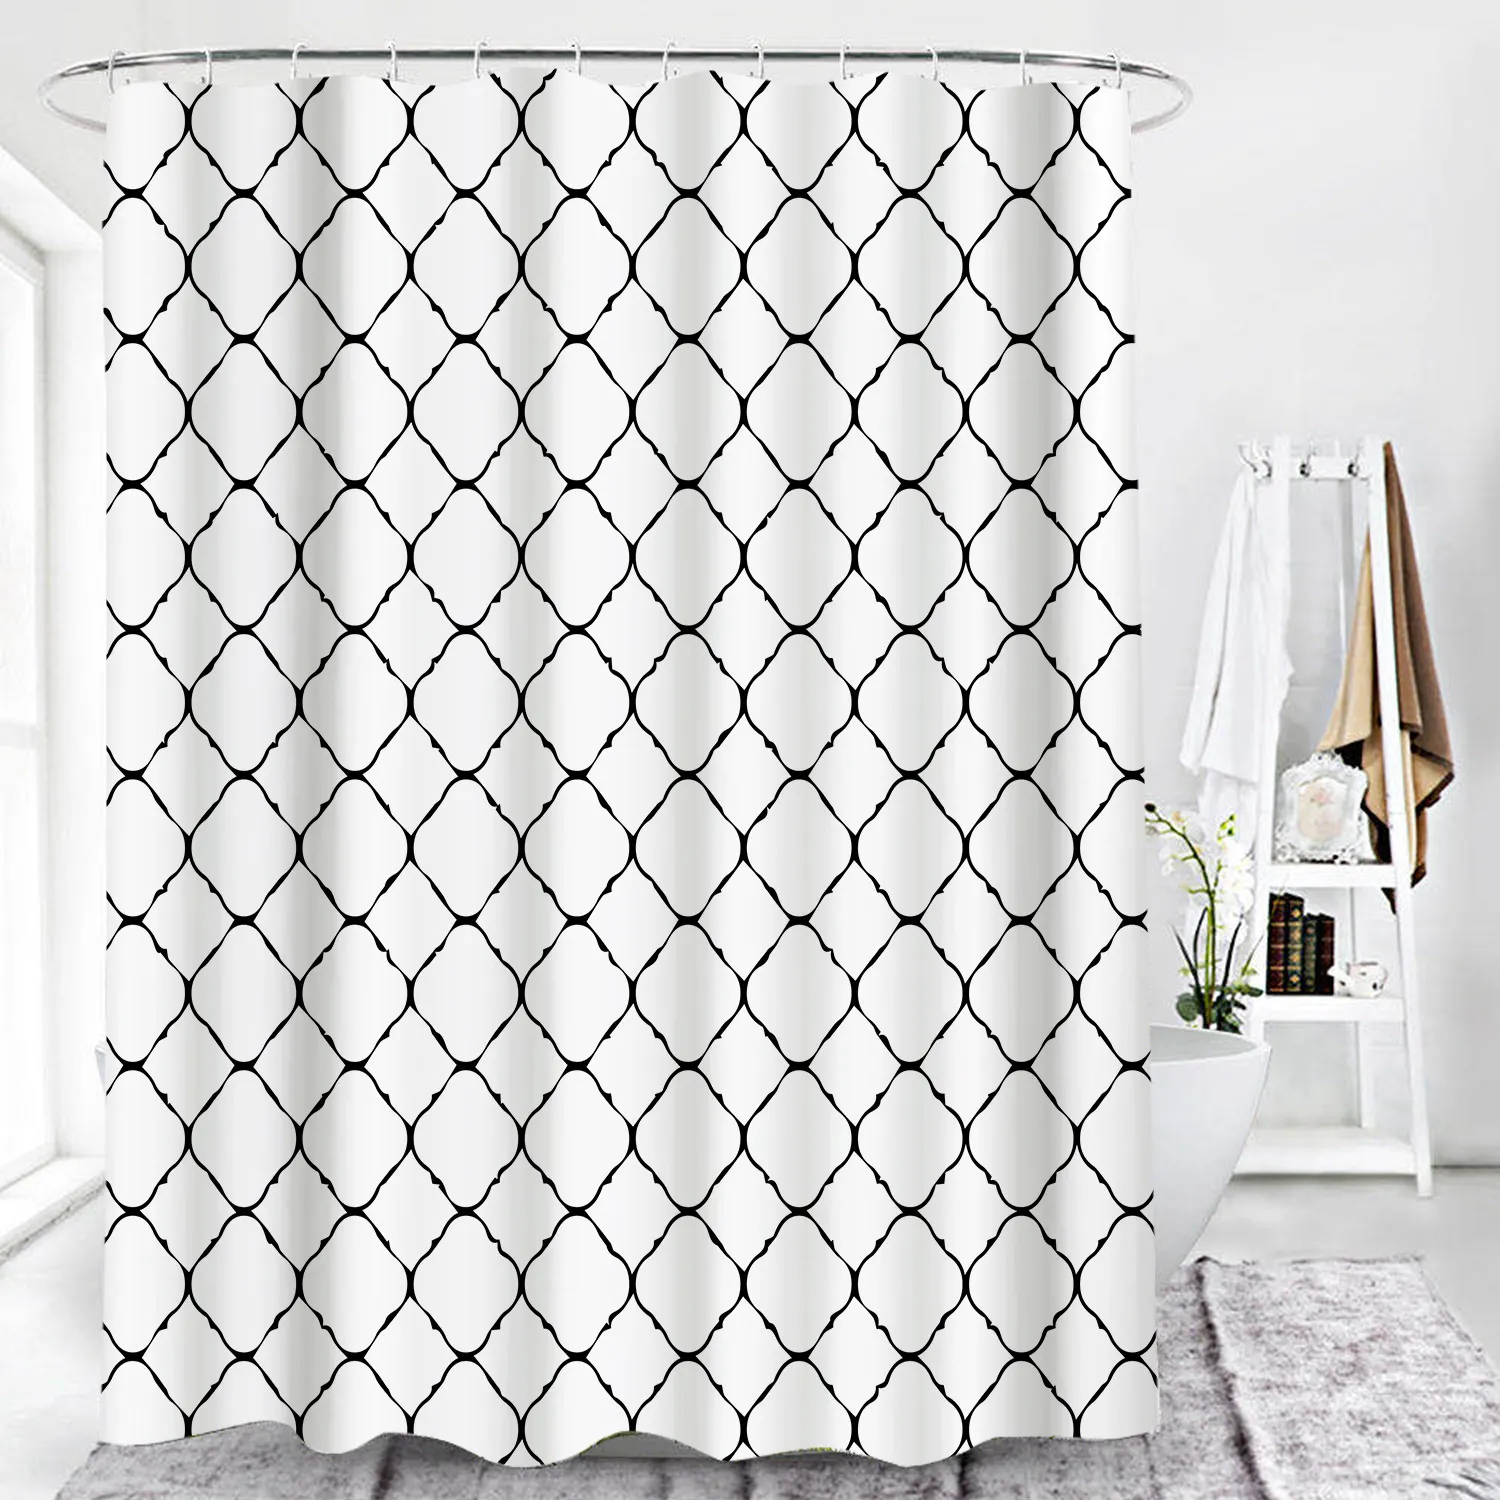 Black And White Geometric Shower Curtain Home Bathroom Decor Curtains Waterproof Fabric With Hook